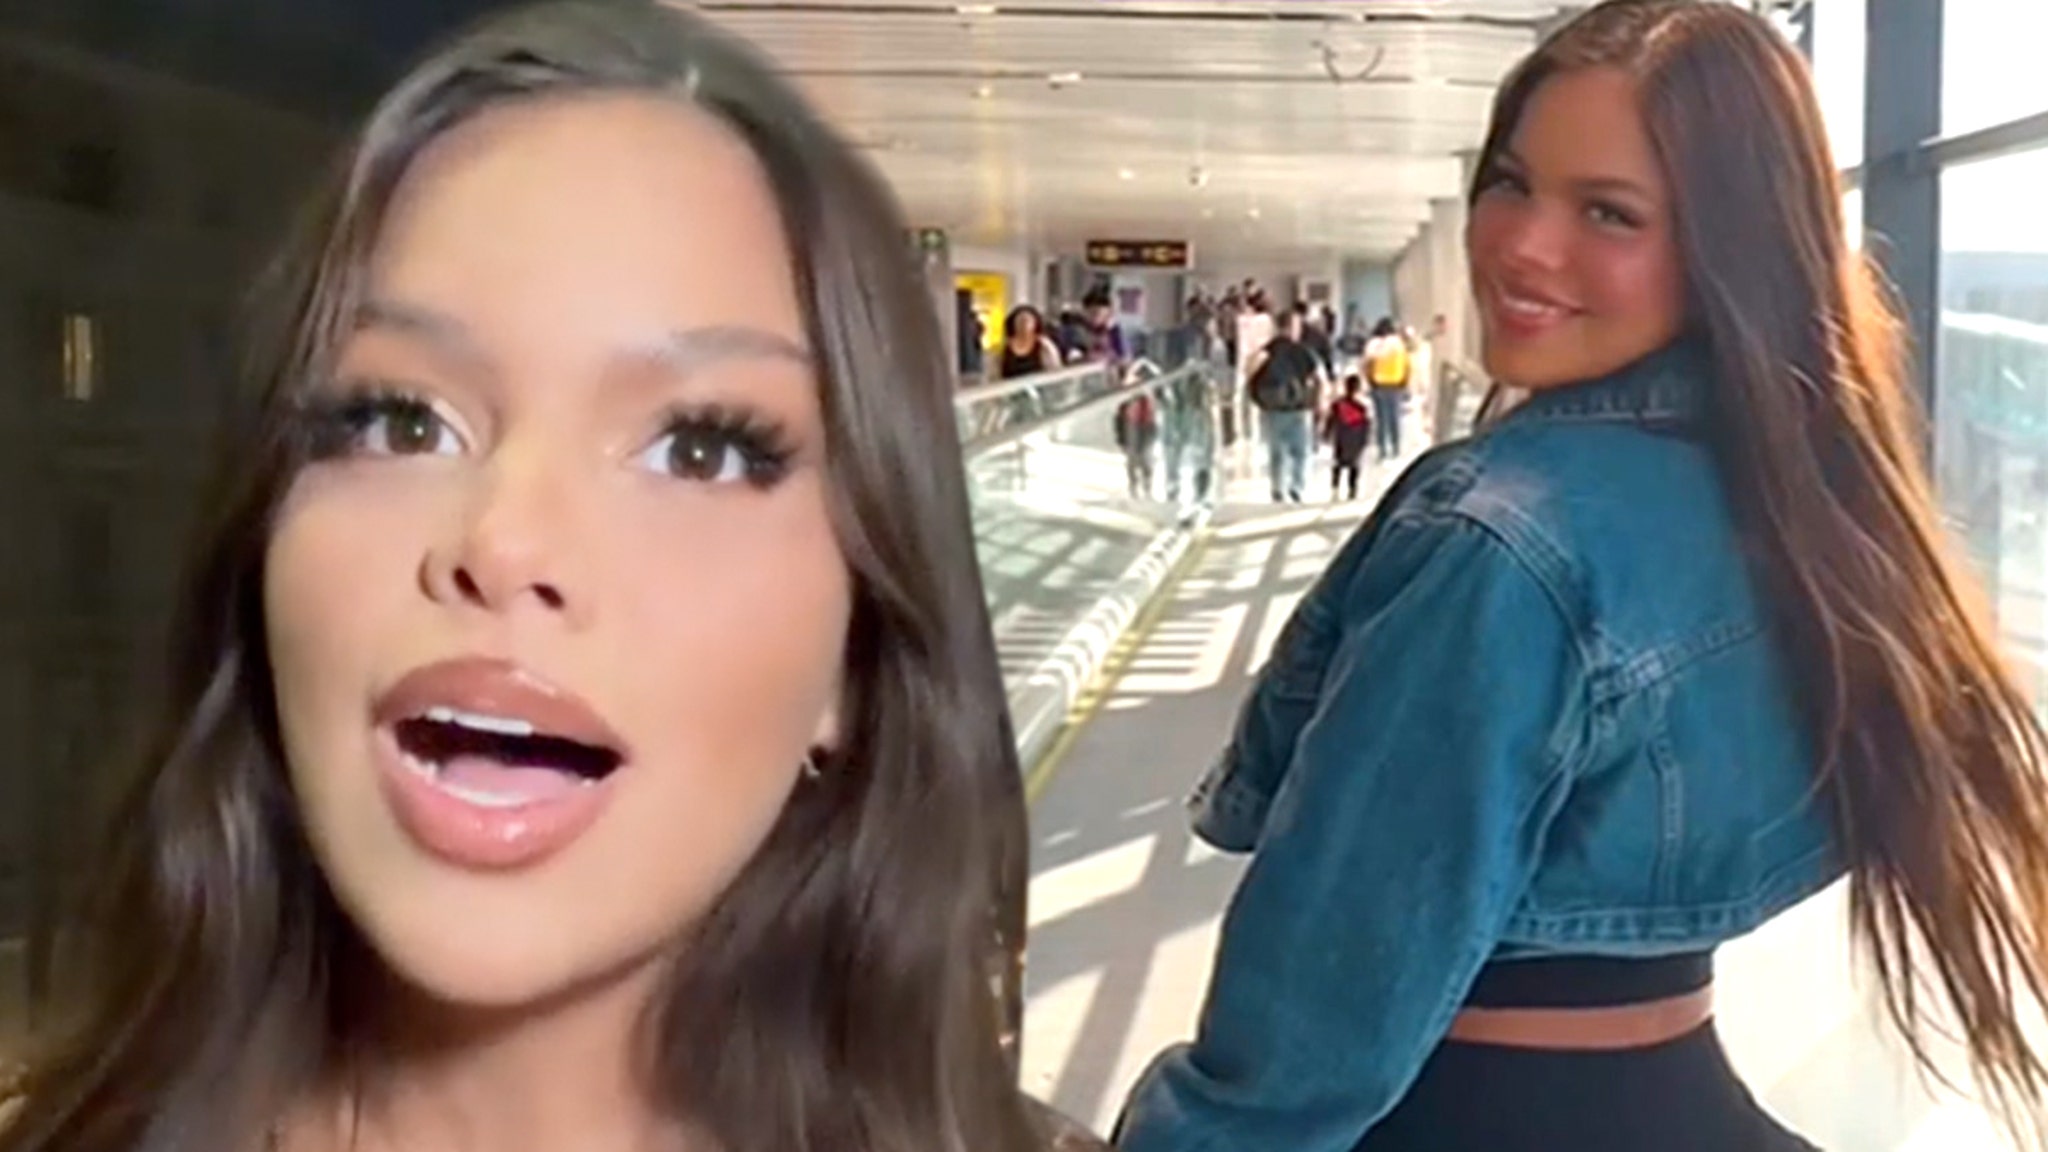 IG Model Gracie Bon Says She’s Serious About Bigger Plane Seat Petition